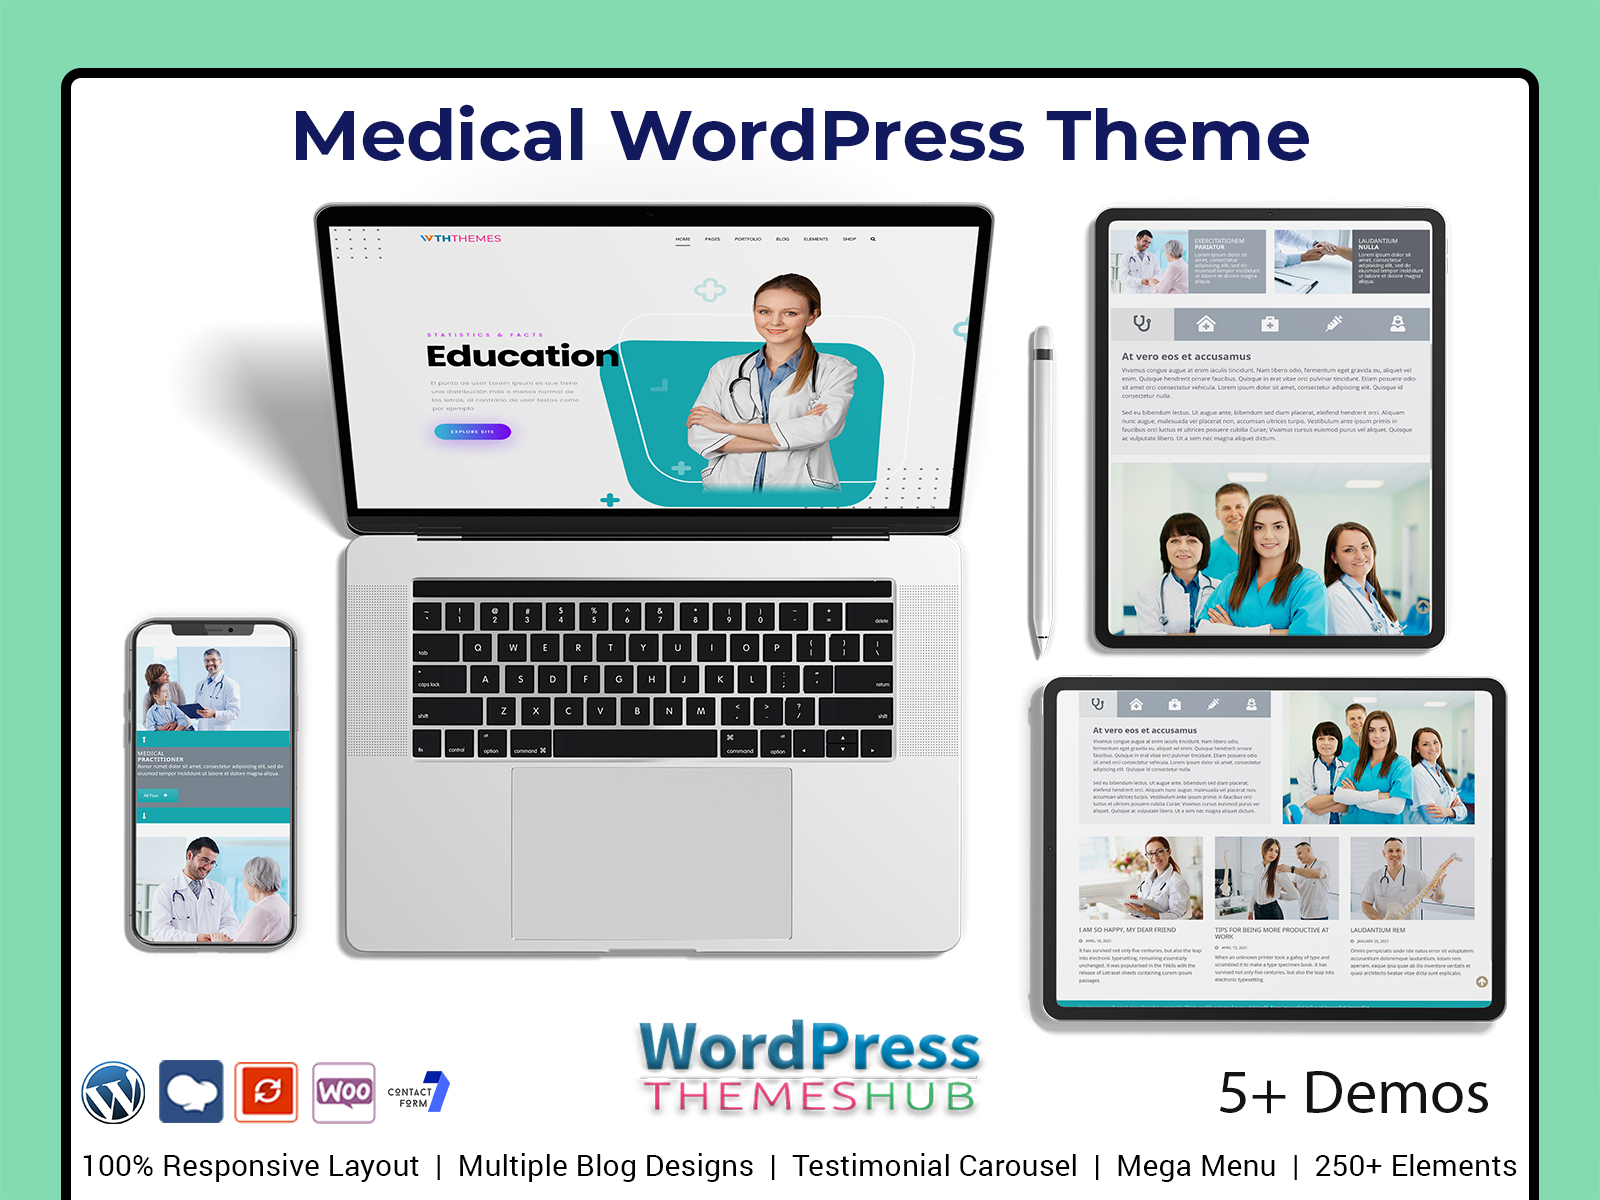 Choosing A Medical WordPress Theme For A Professional Medical Website